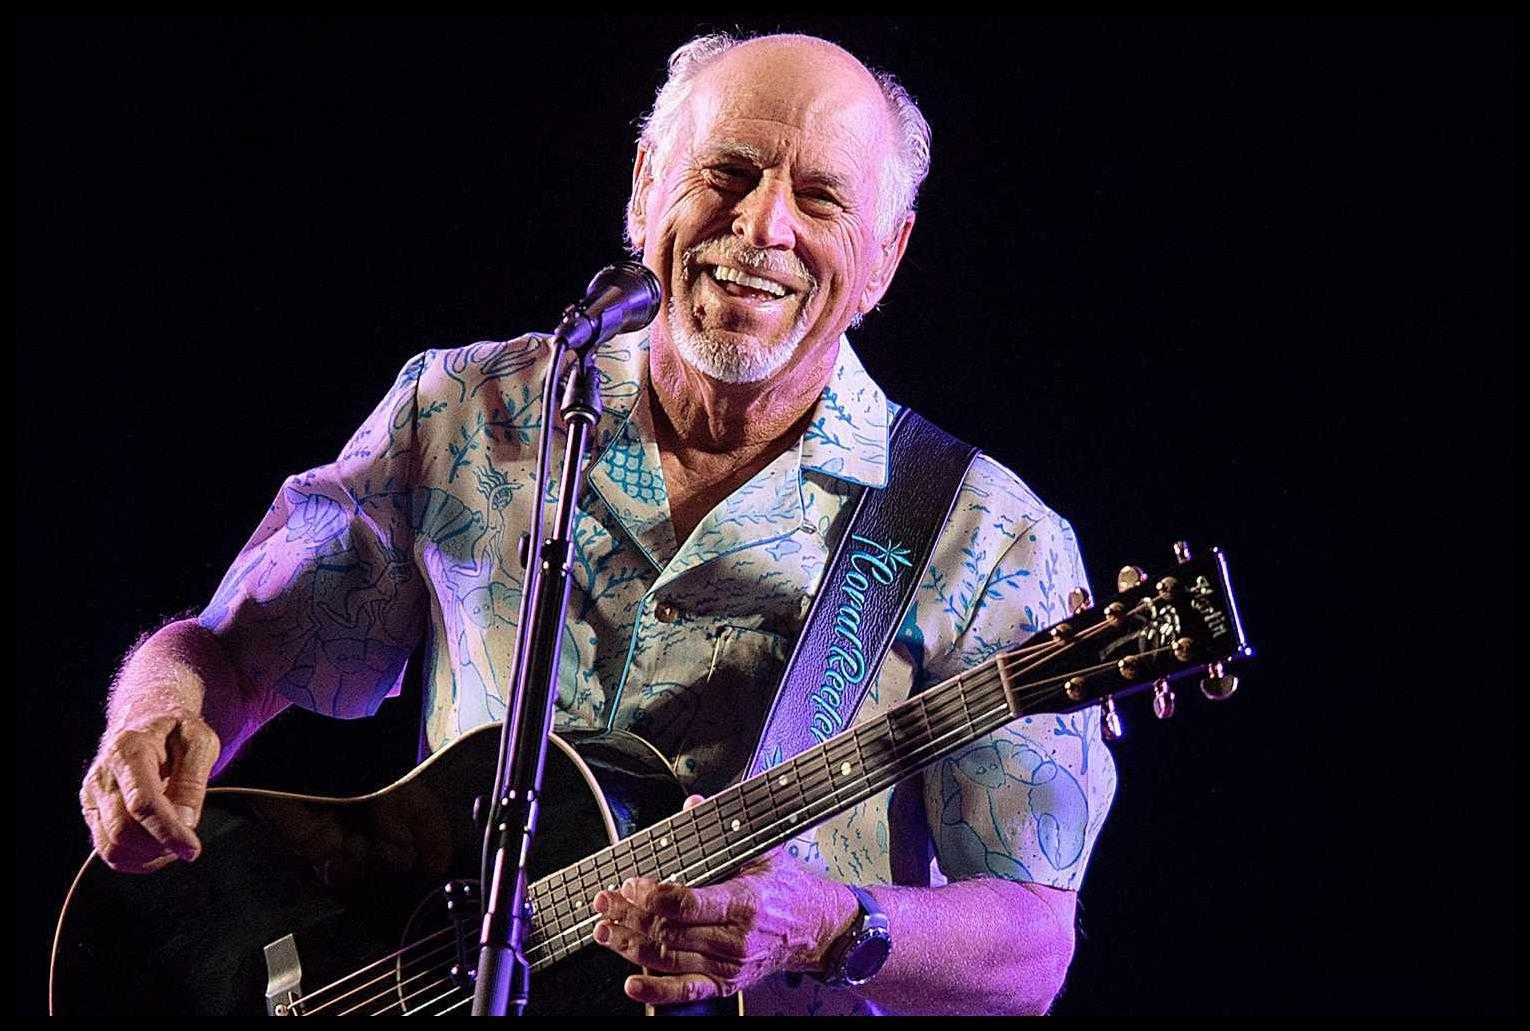 The Illness and Legacy of Jimmy Buffett: A Musical Journey